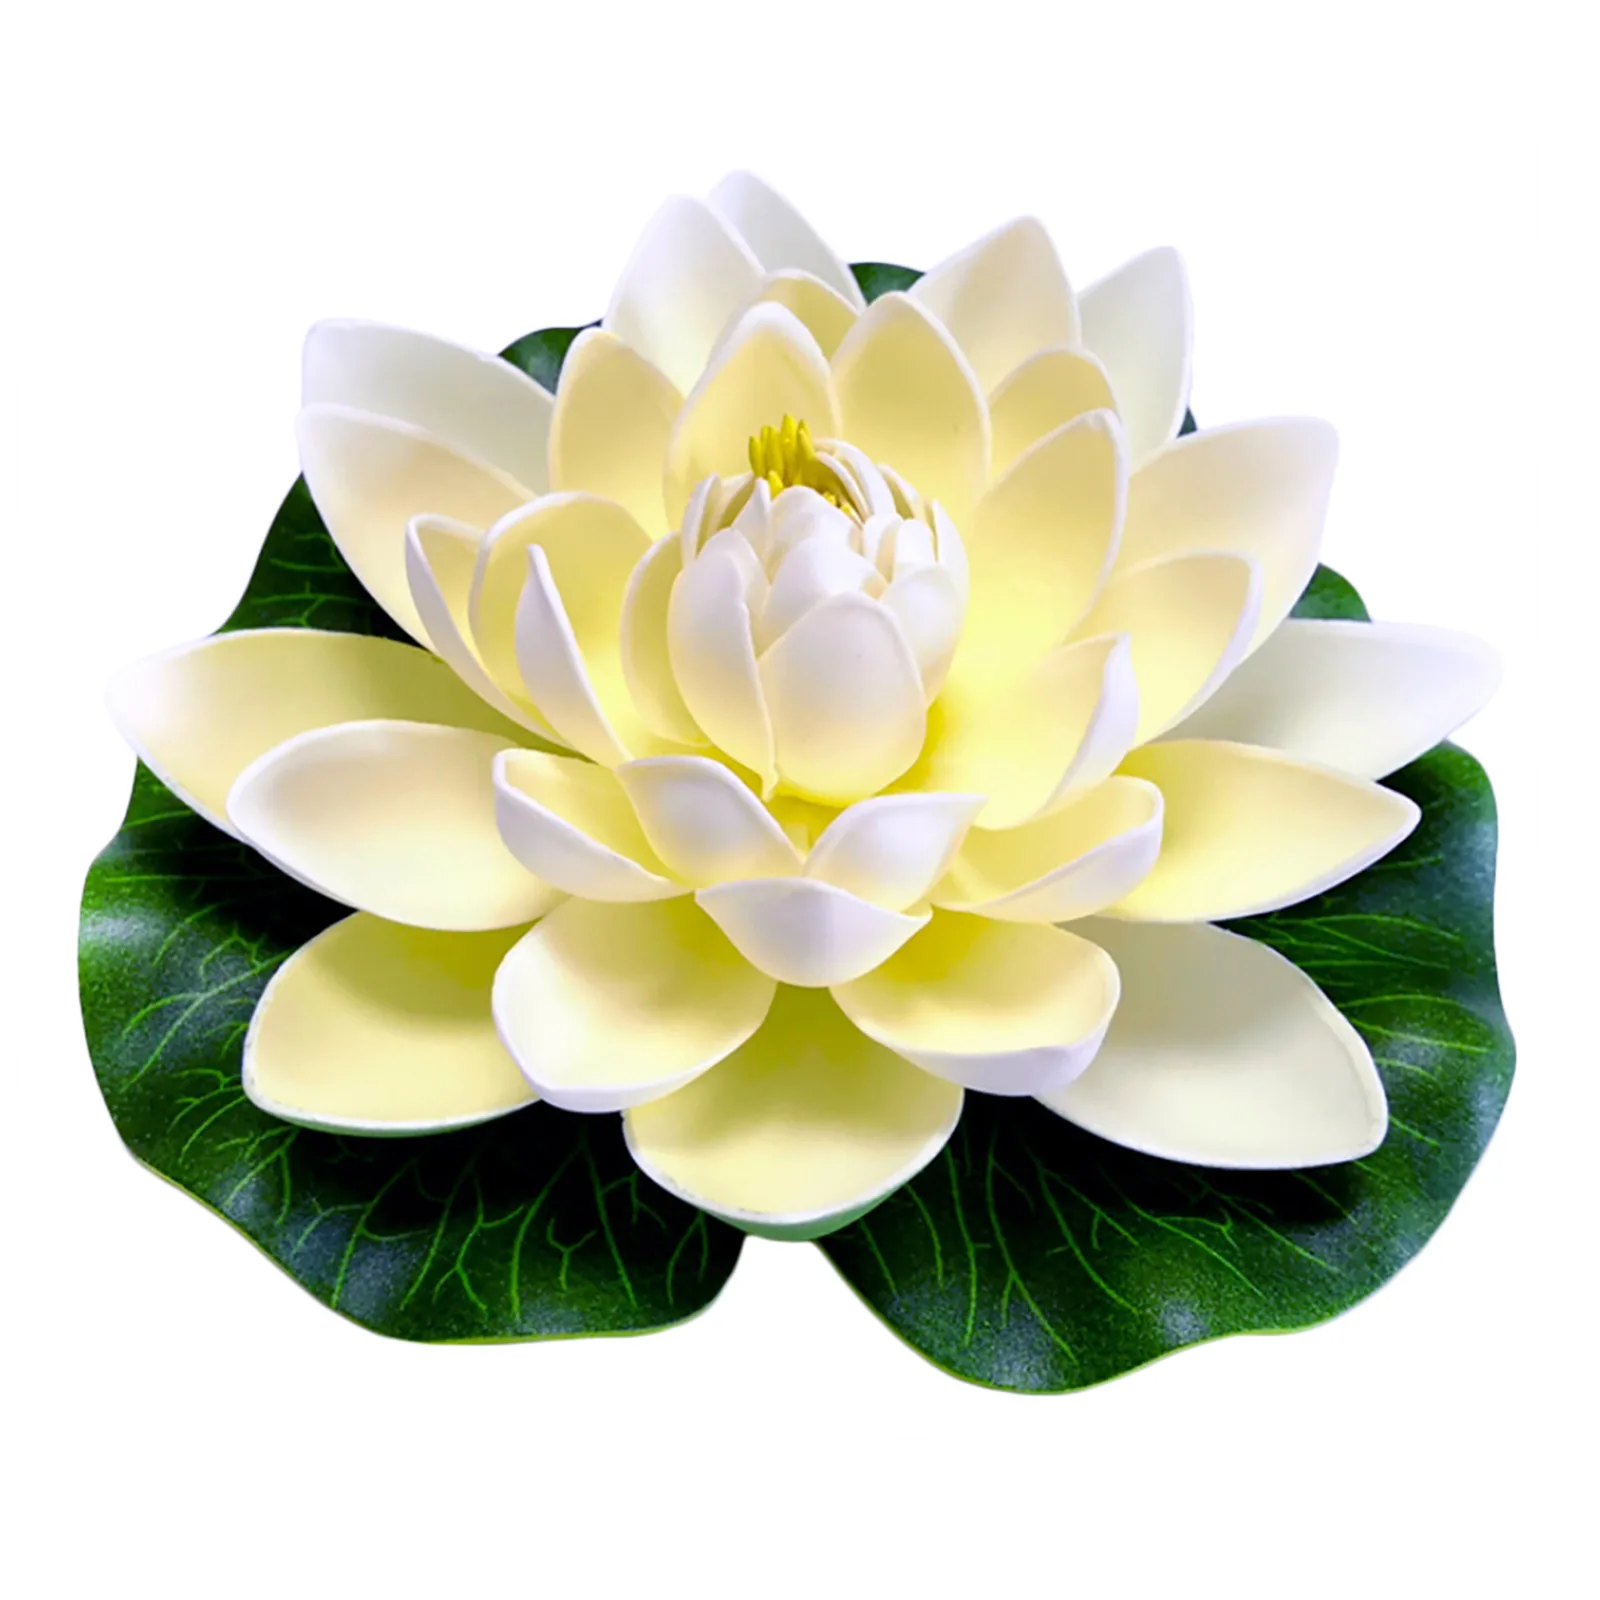 GoodFaith 18cm Artificial Lotus Flower Fake Floating Water Lily Fish Tank Ornament for Home Garden Patio Pond Aquarium Swimming Pool Wedding Decoration 